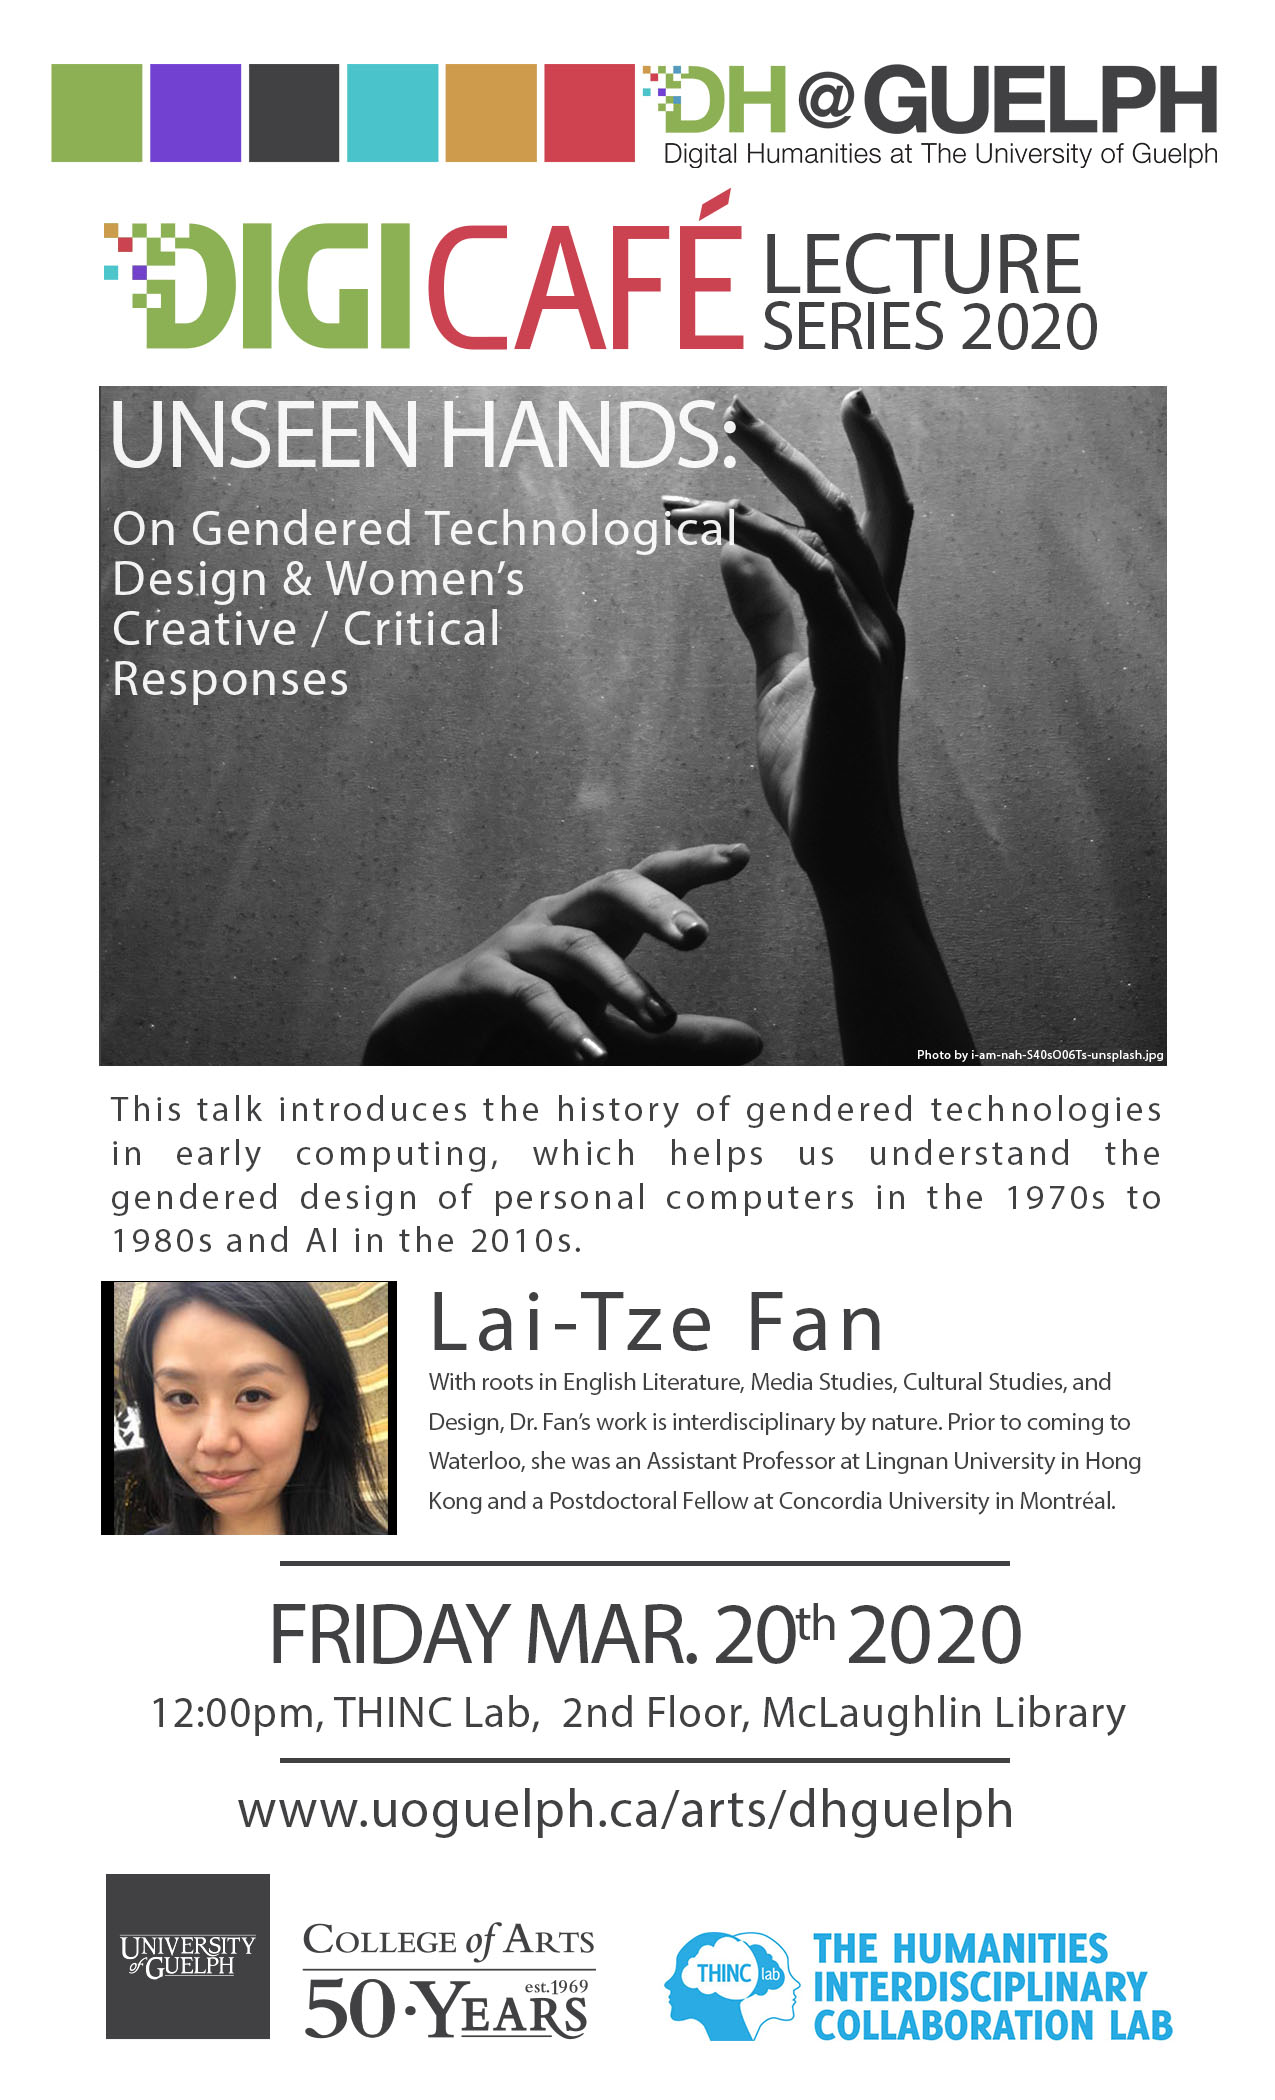 Poster depicting hands in the air and a headshot of Lai-Tze Fan